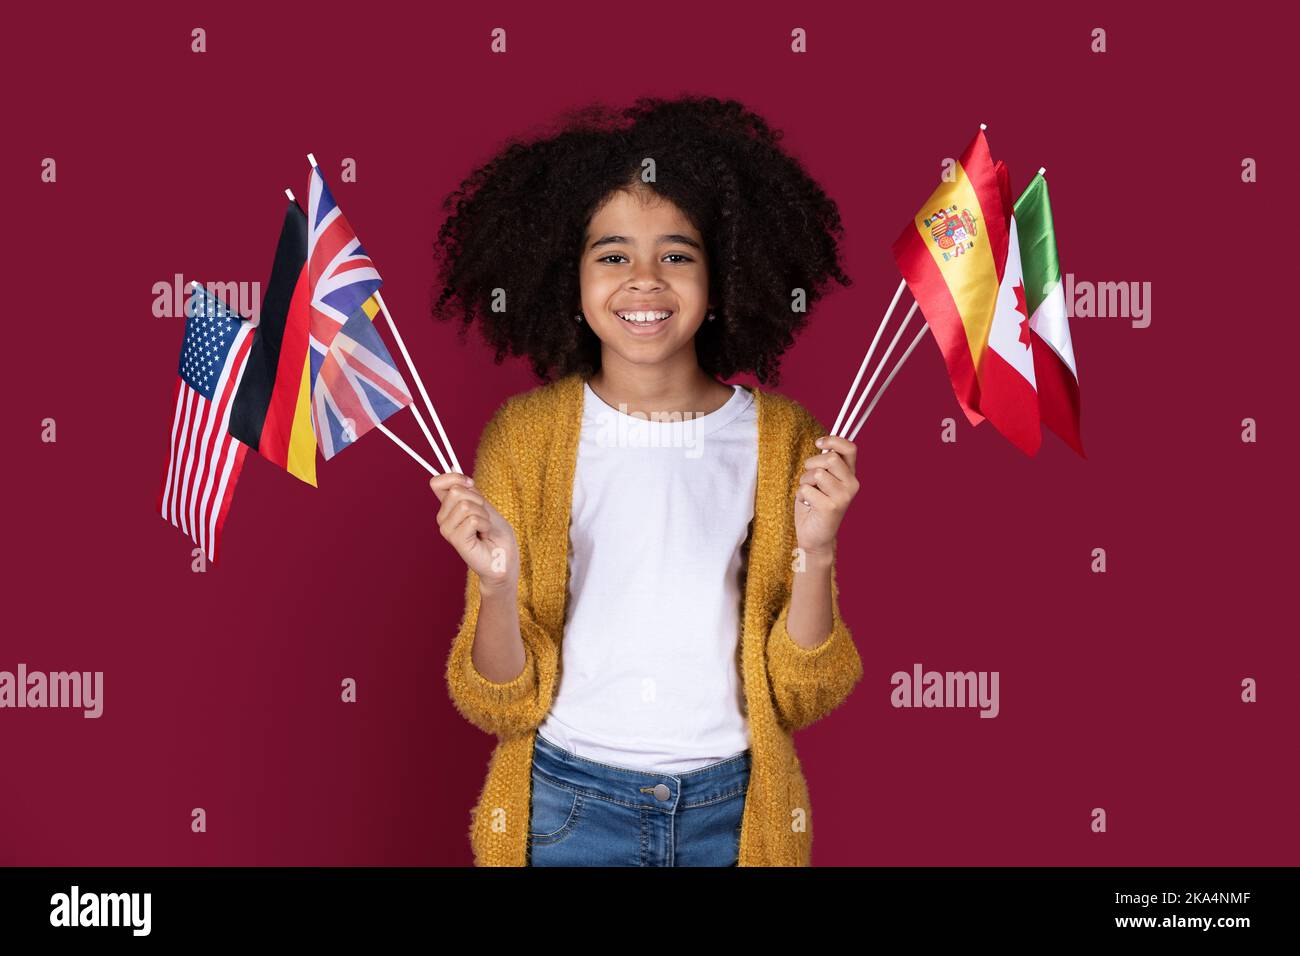 Adorable black girl schooler holding flags of various countries Stock Photo